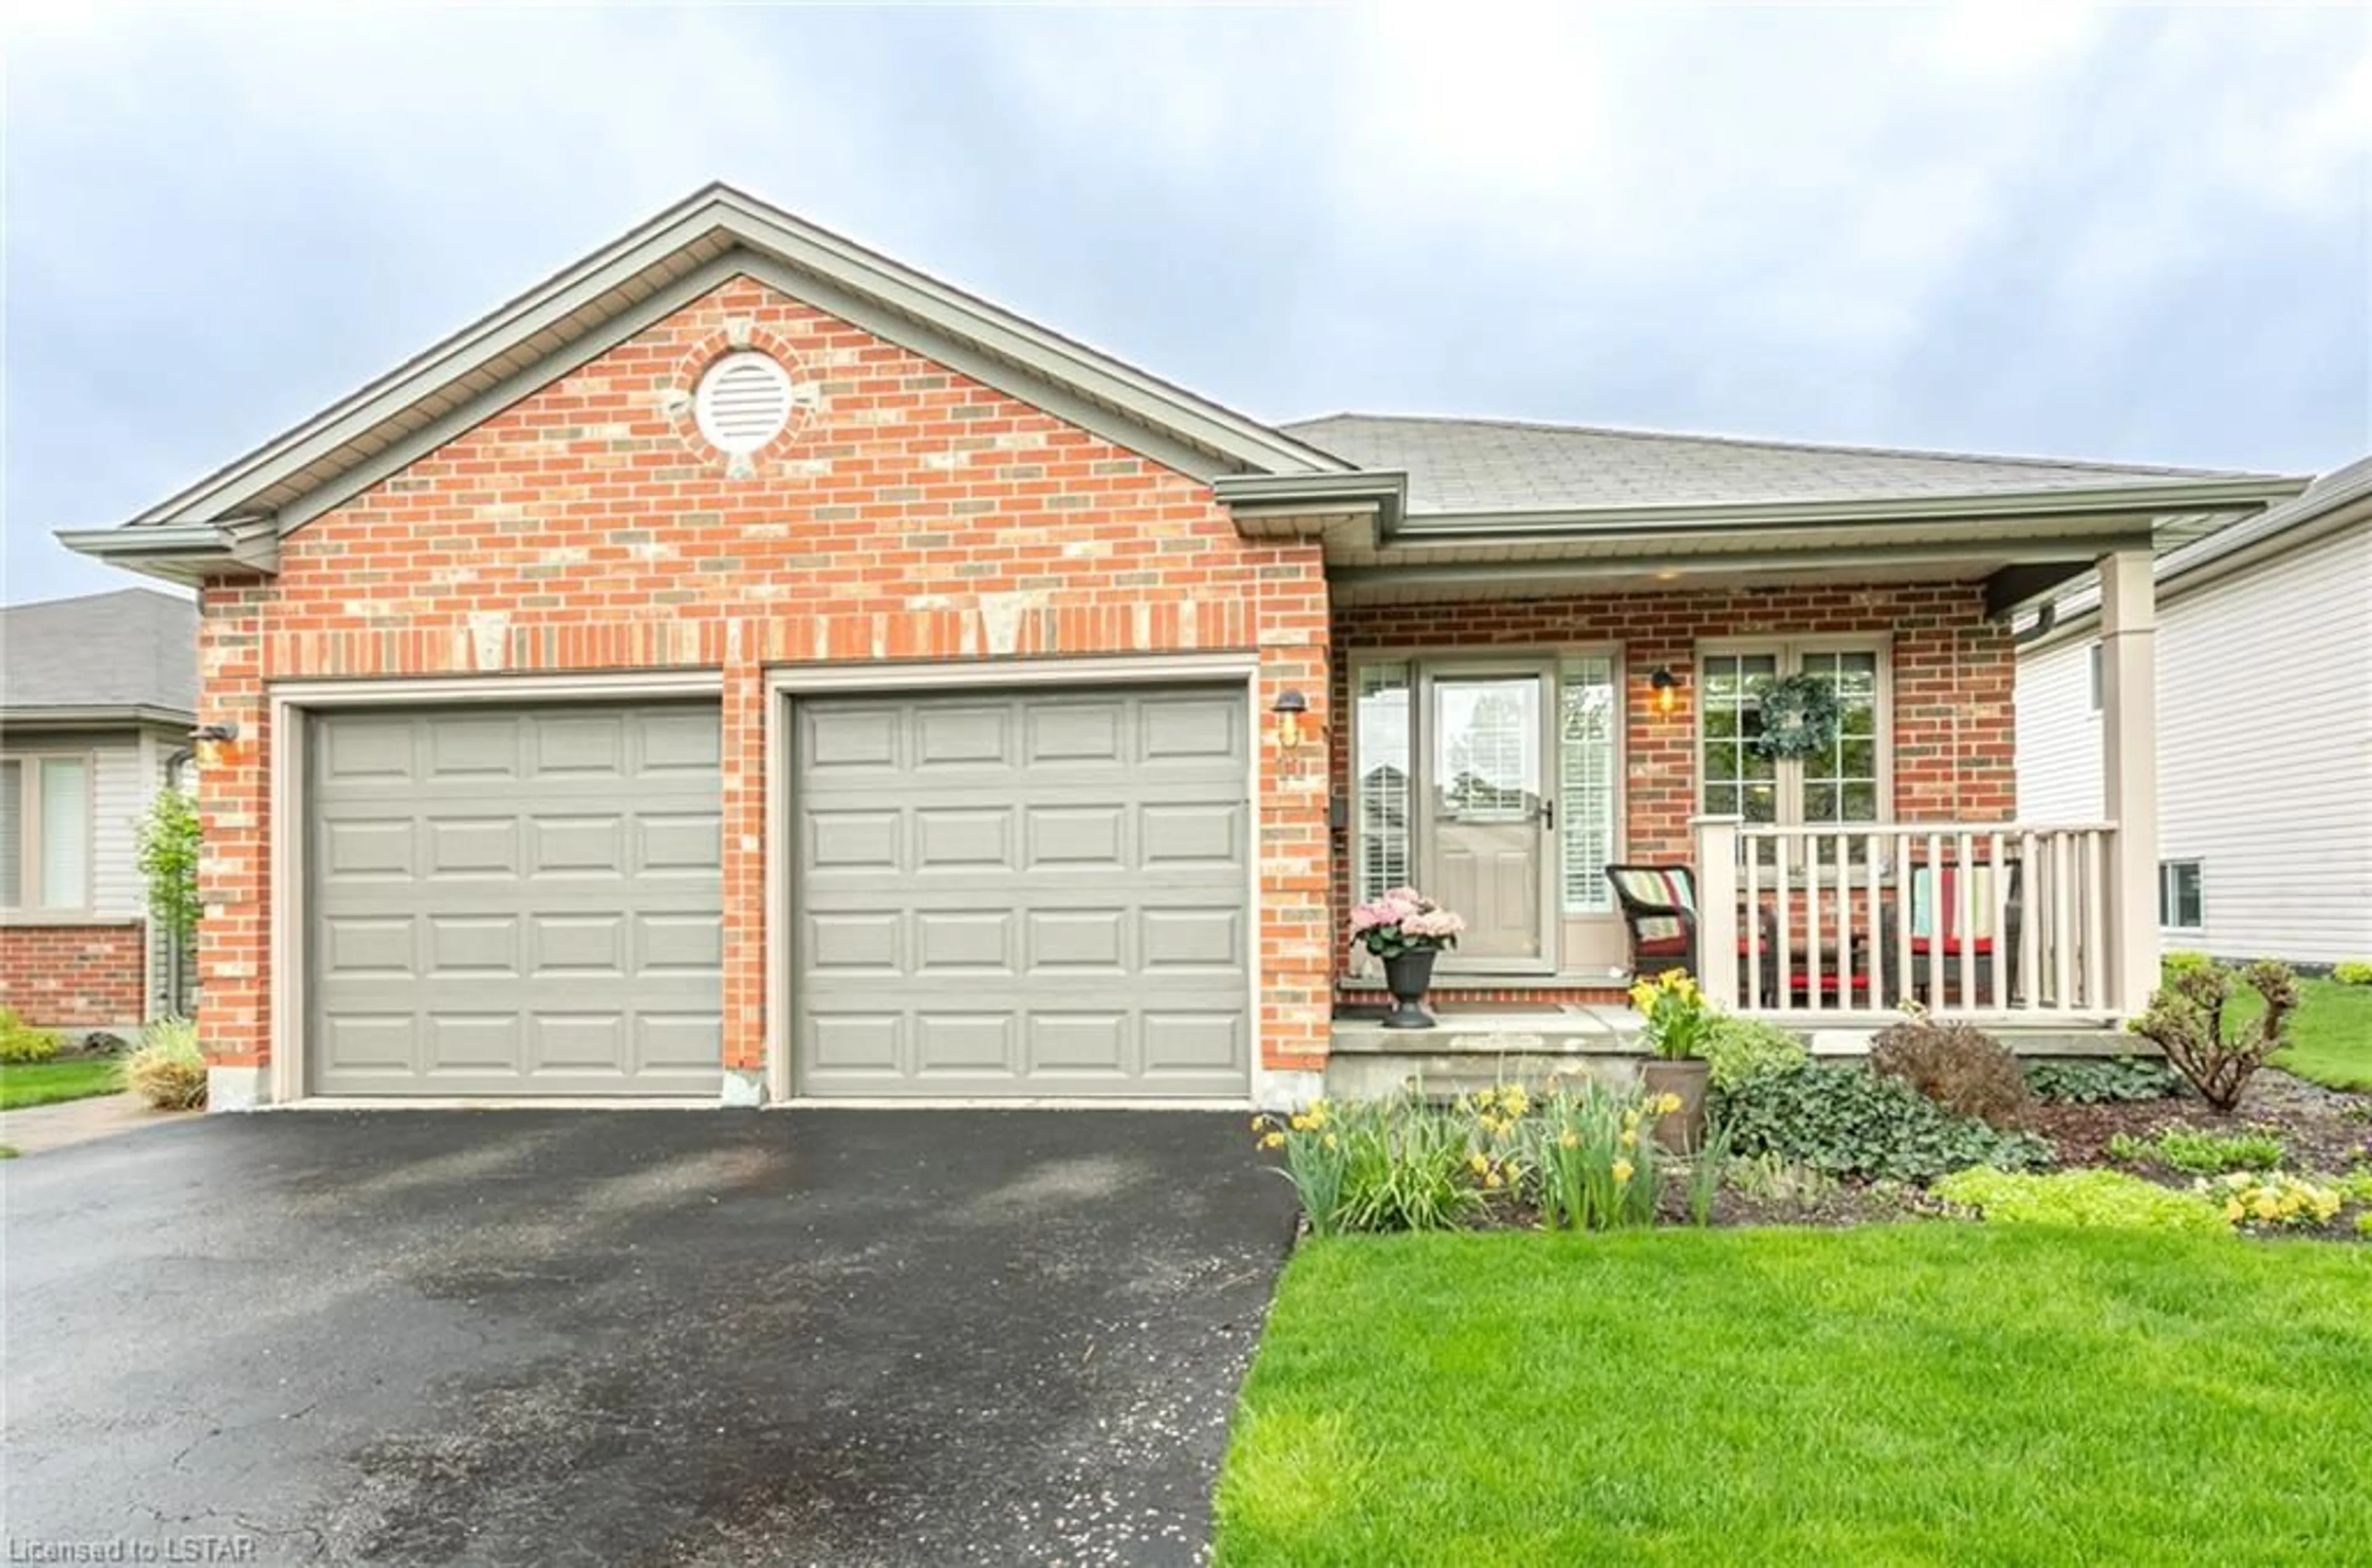 Home with brick exterior material for 59 Pennybrook Cres #11, London Ontario N5X 4C3